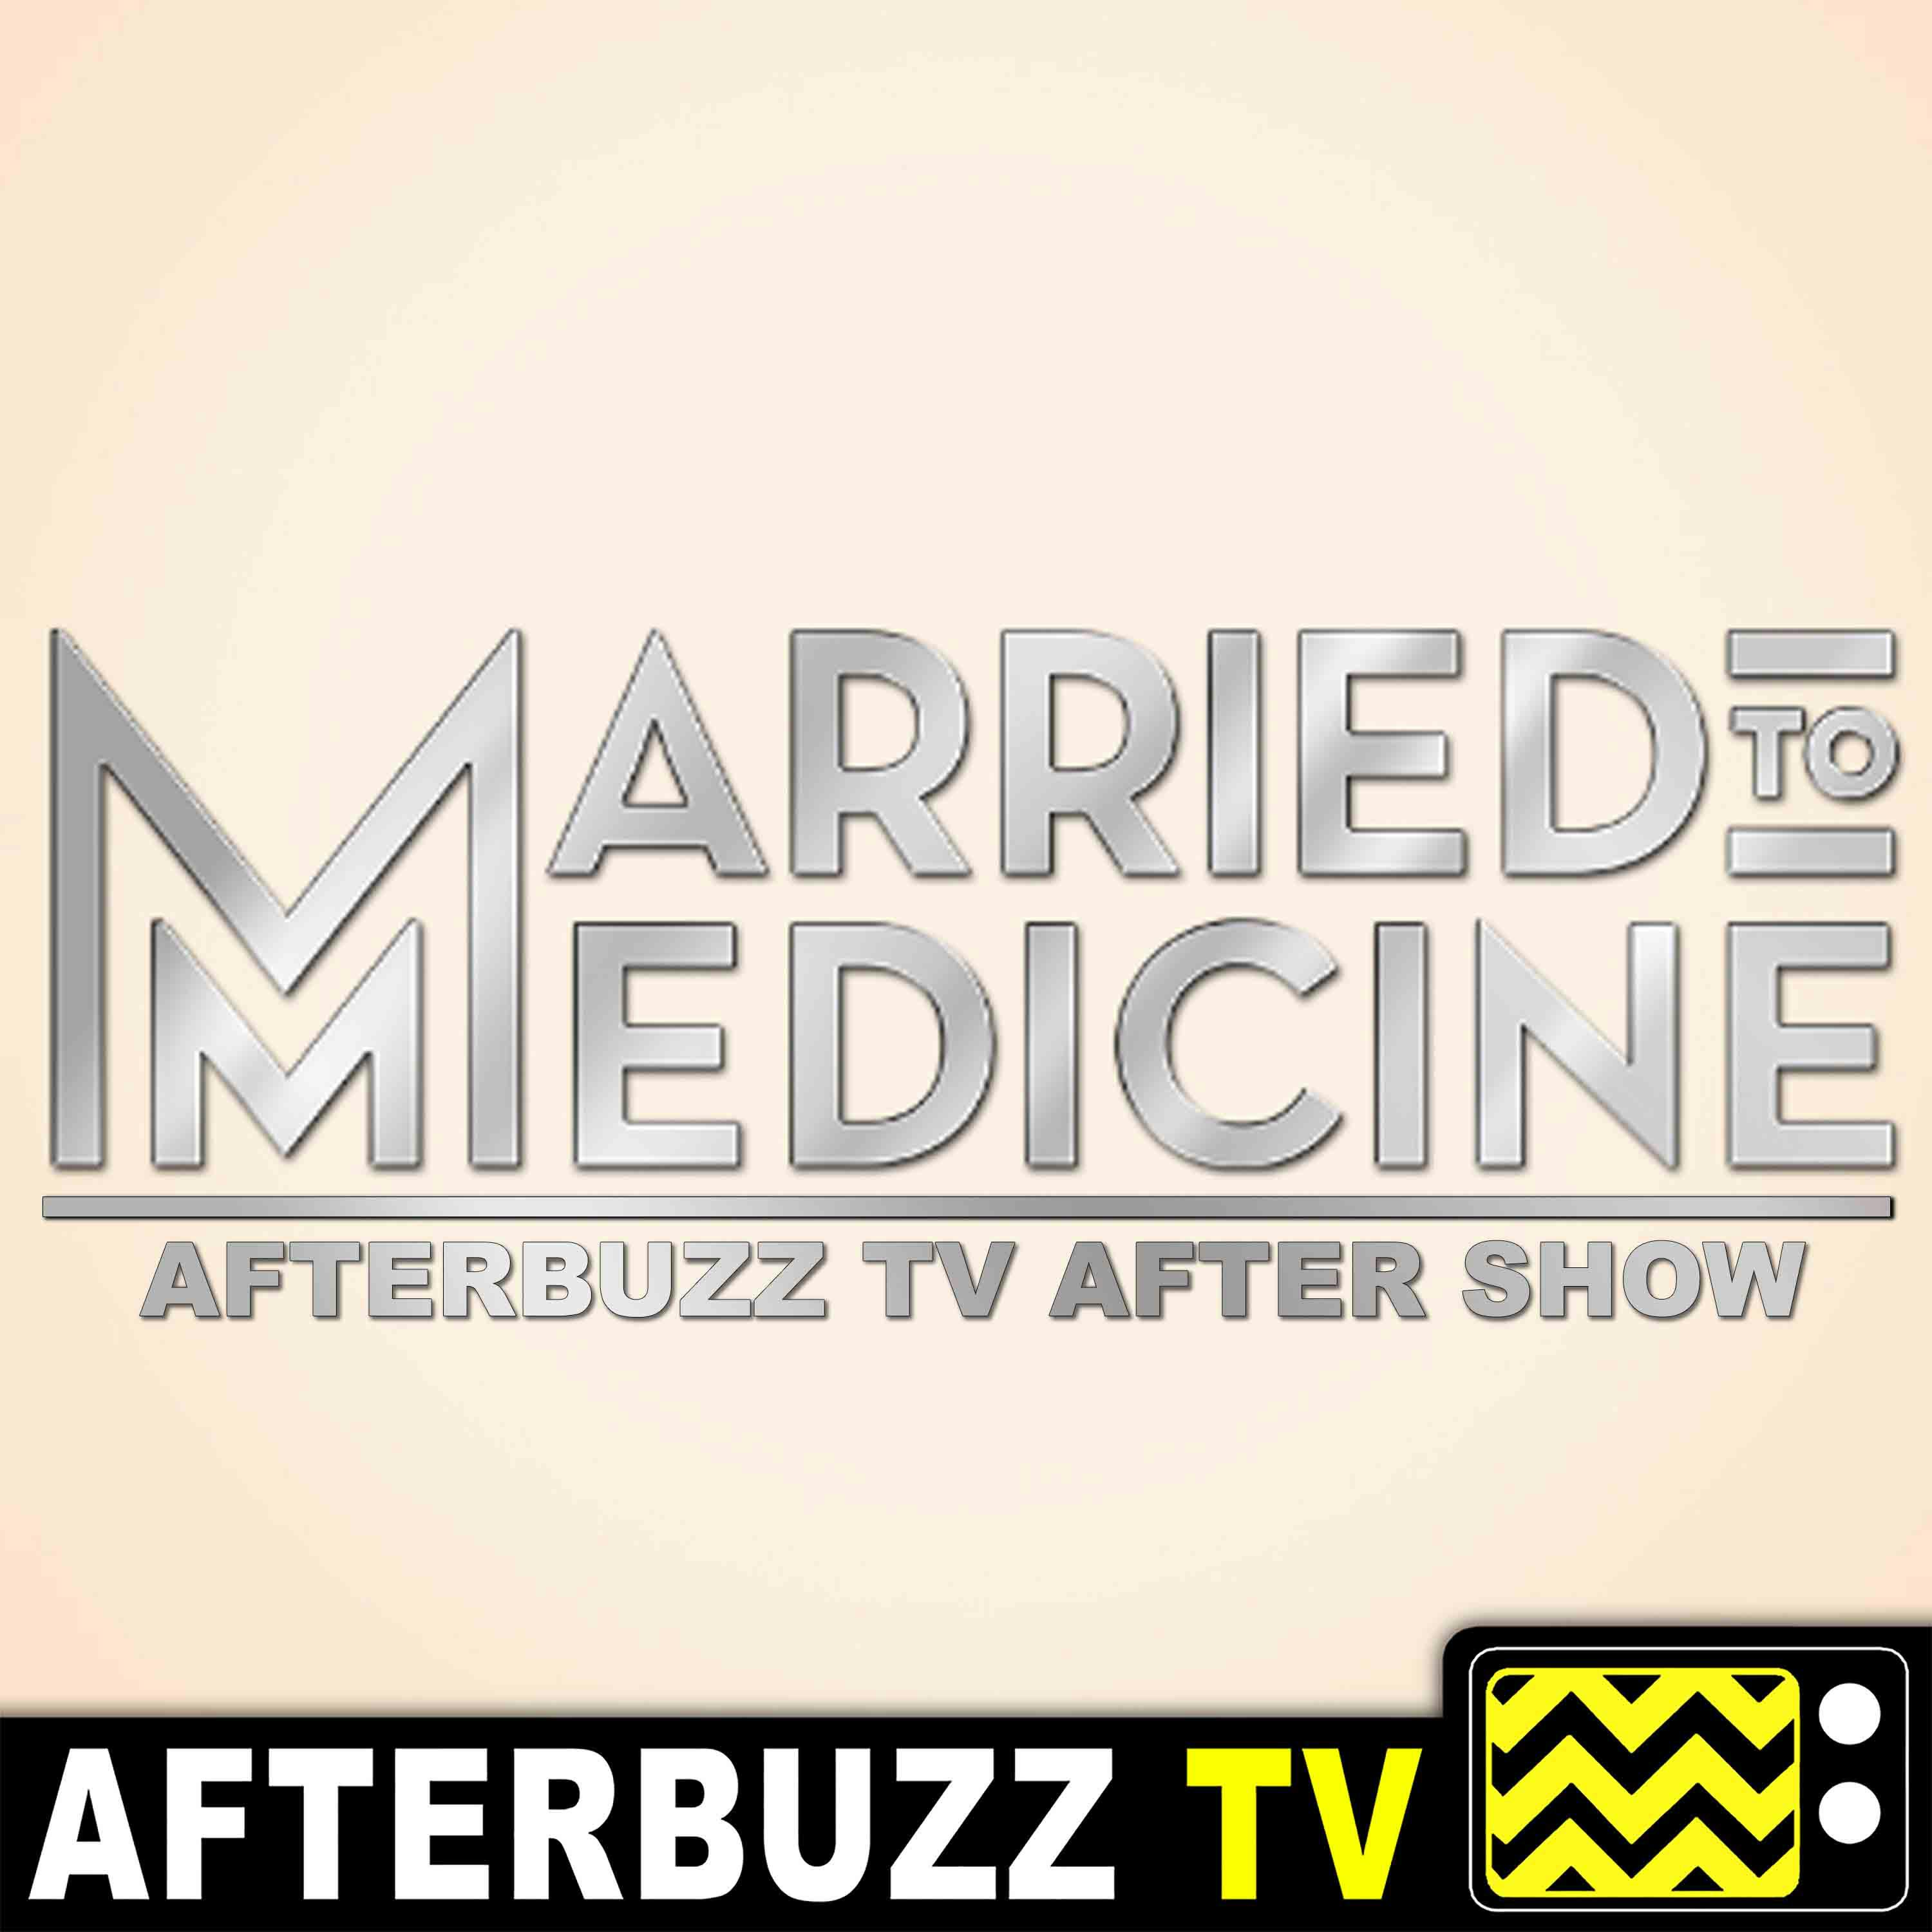 "Trouble in Spa-radise" Season 7 Episode 14 'Married to Medicine' Review